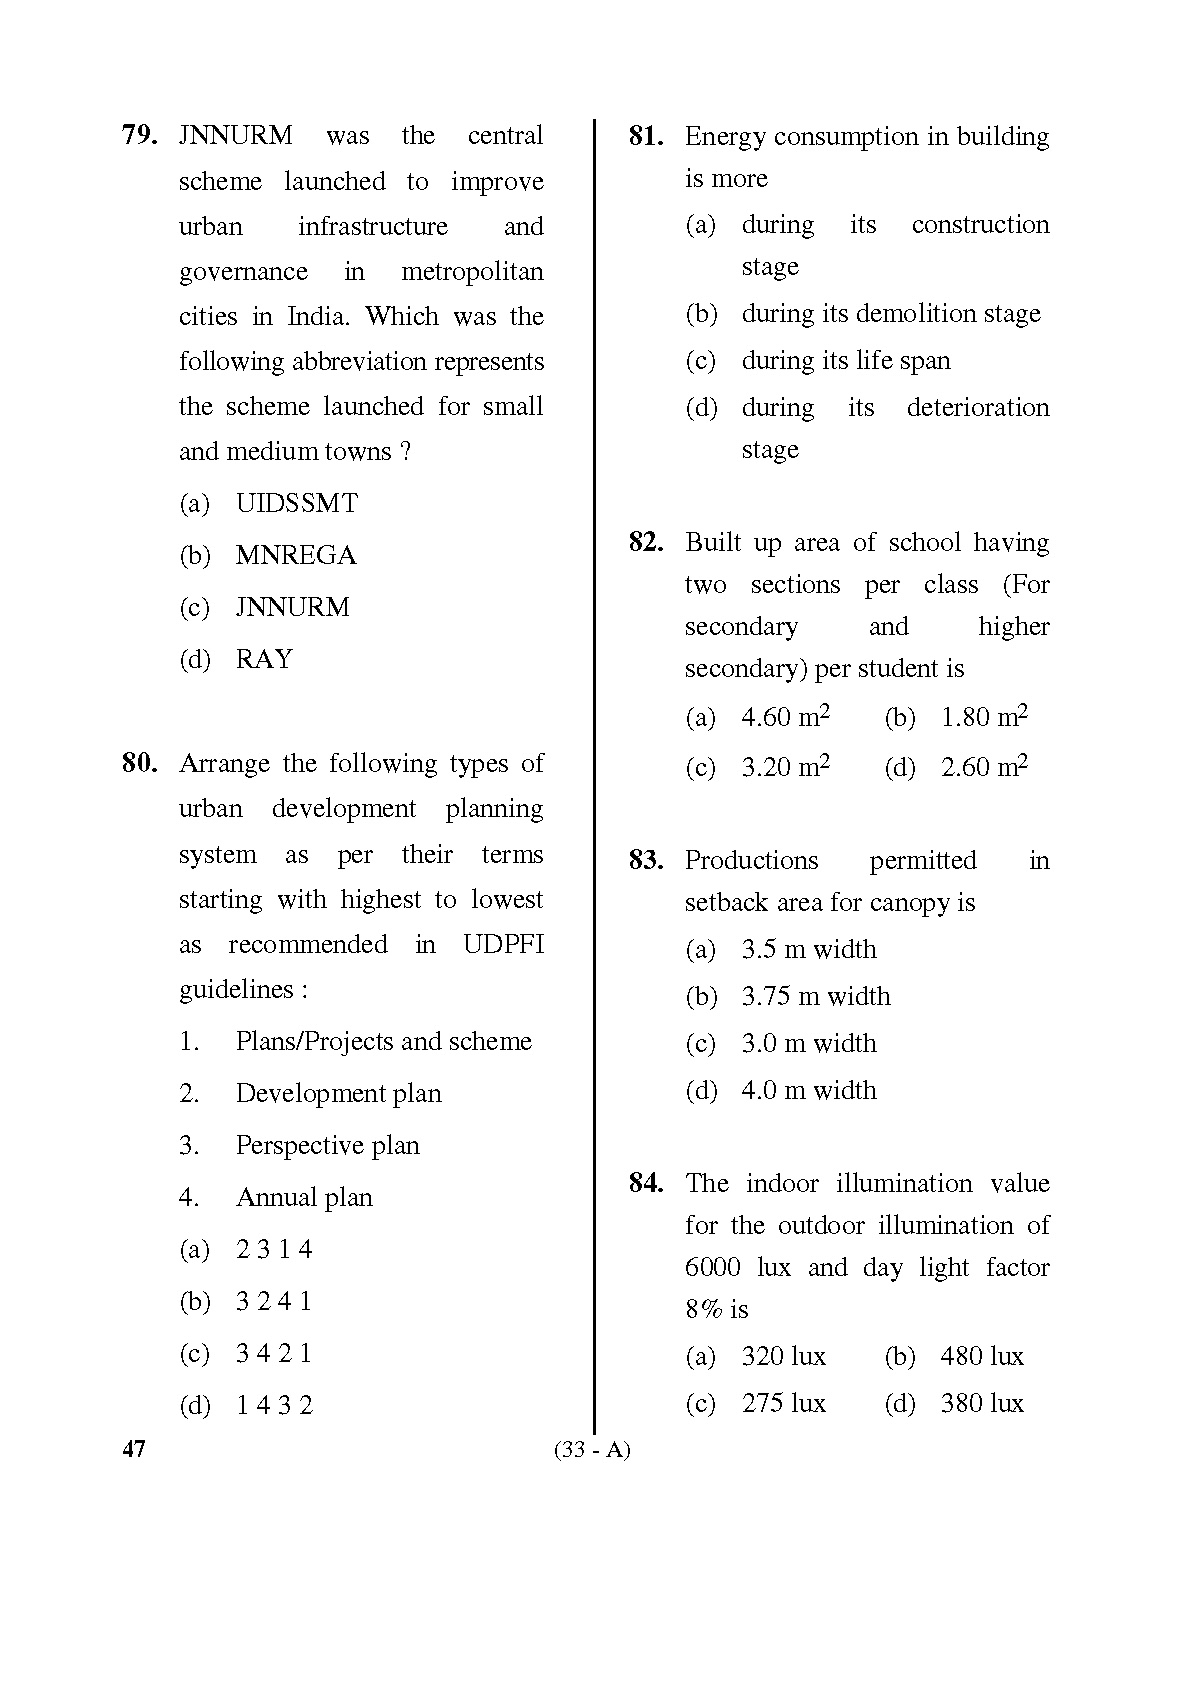 Karnataka PSC Town Planners Exam Sample Question Paper 32